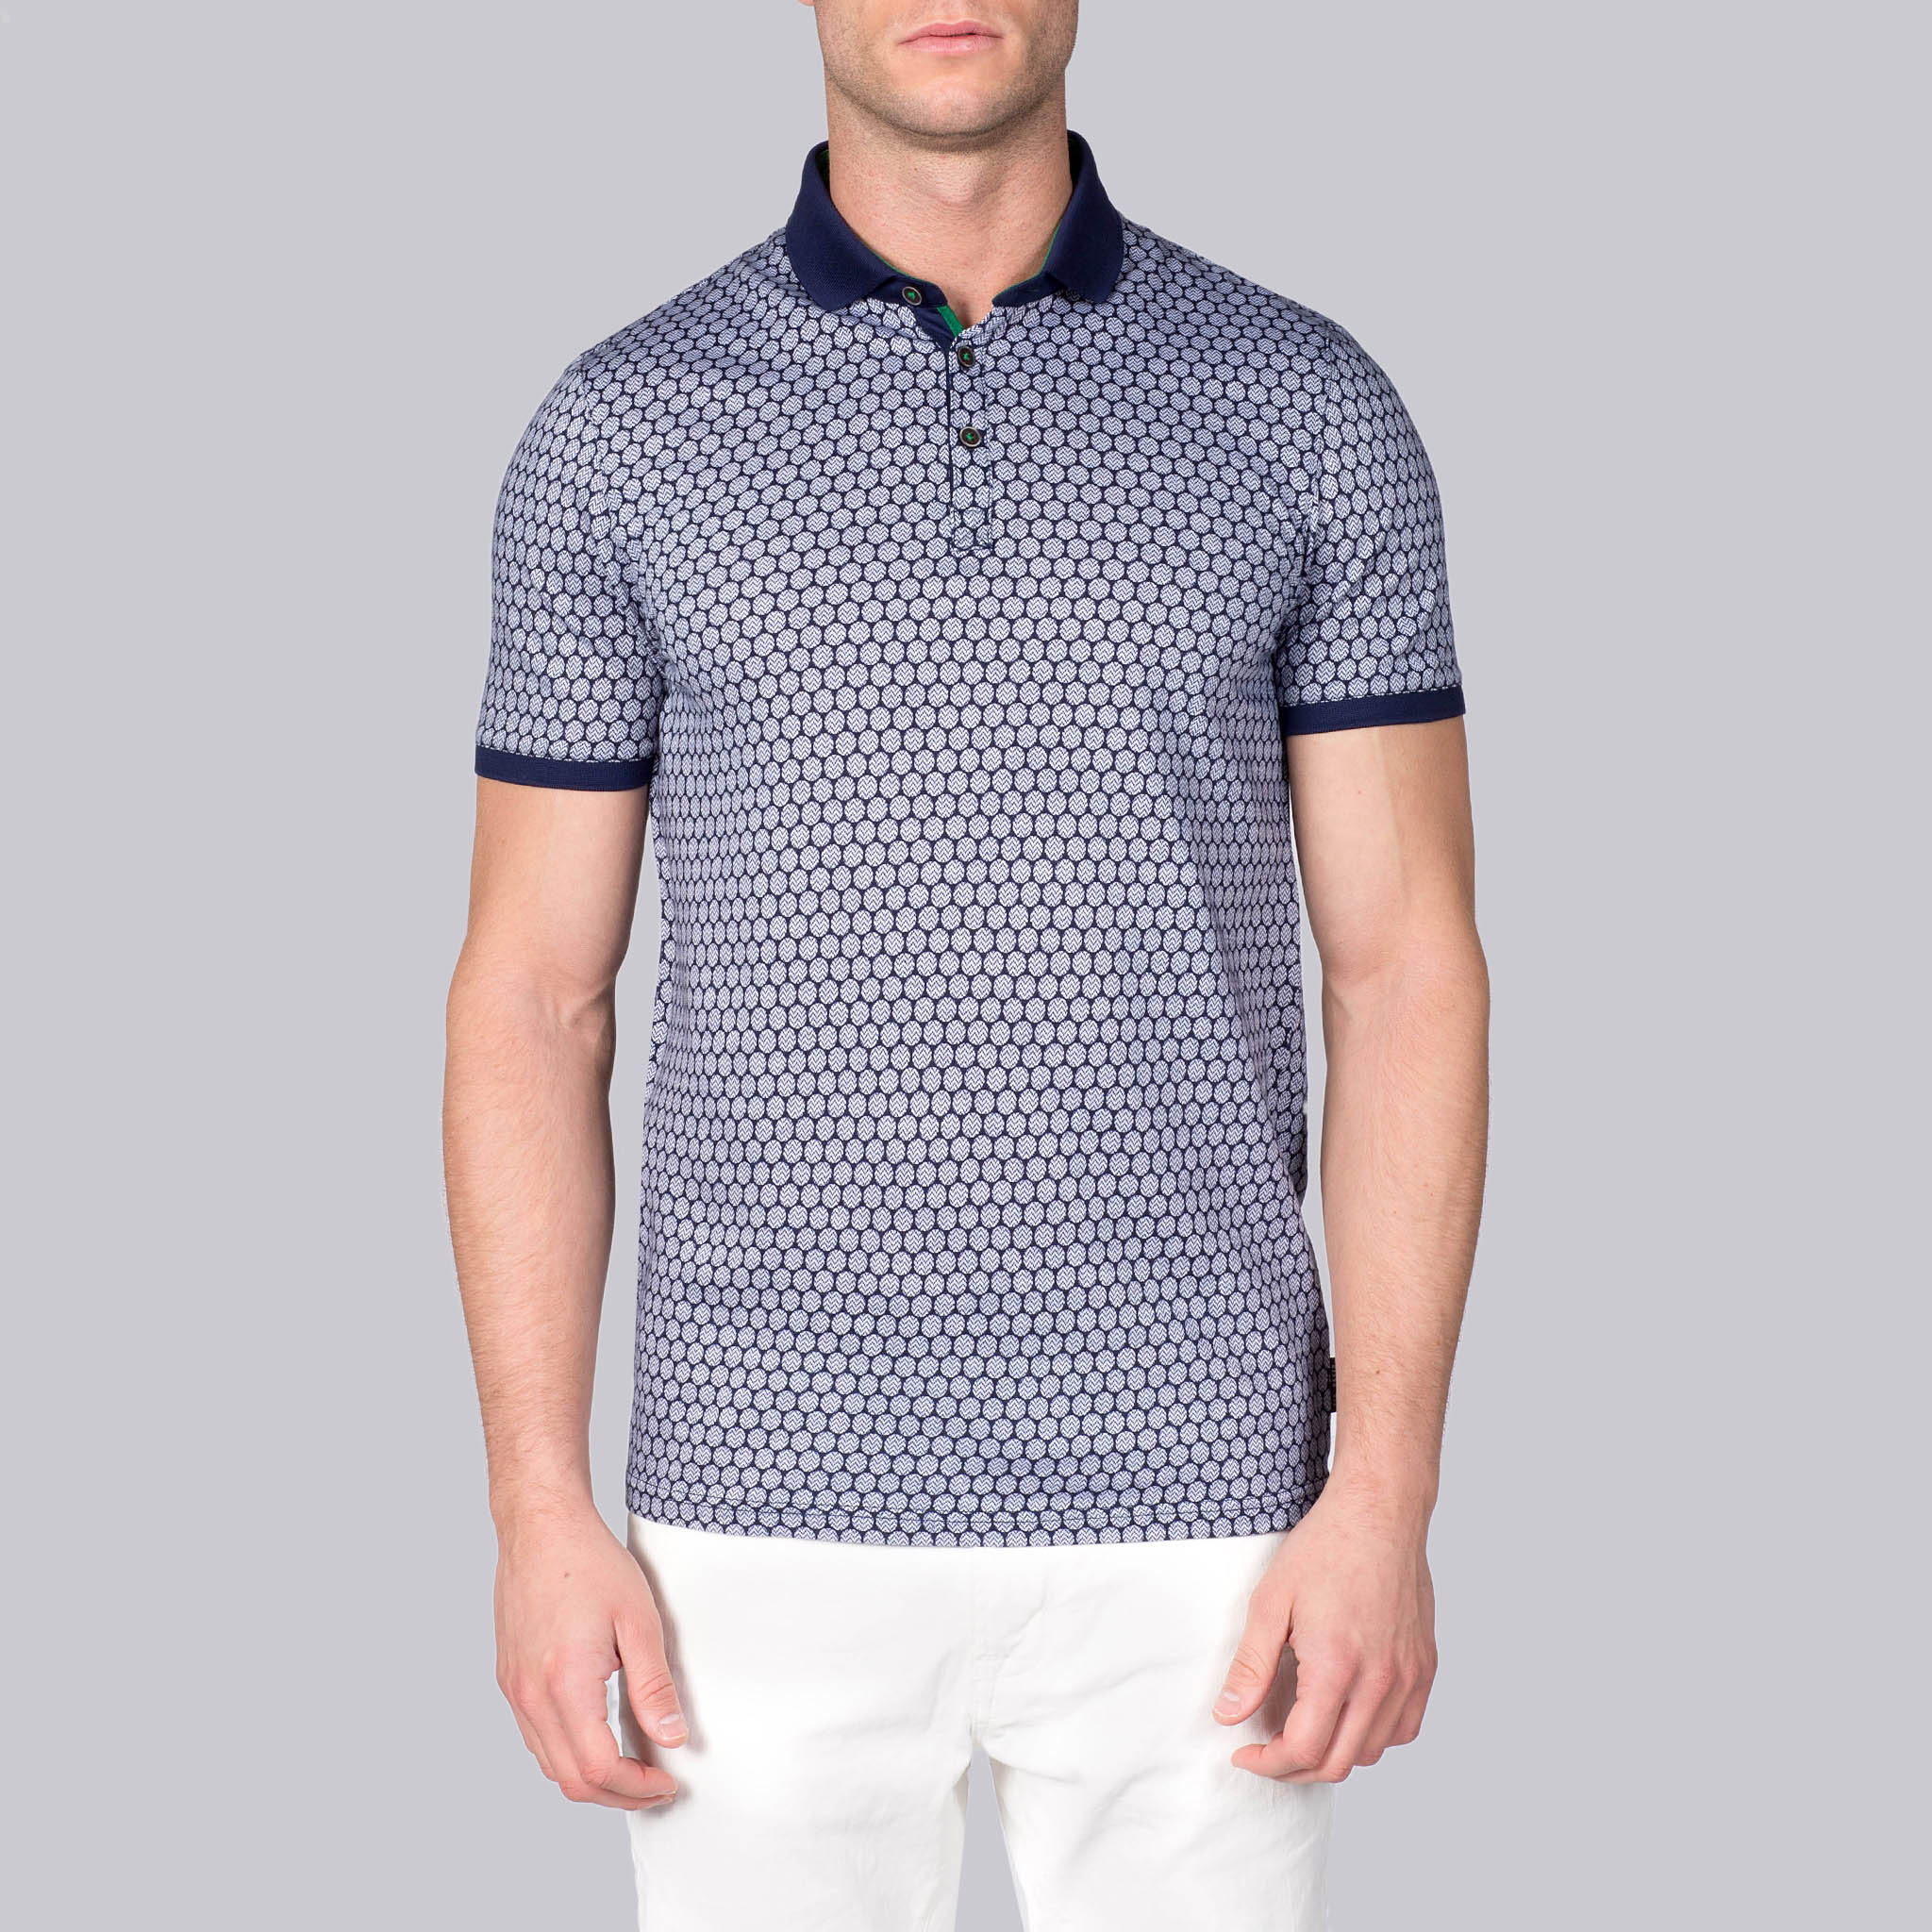 PATTERNED-POLO-TEDBAKER-RUNAPP-FRONT | GOTSTYLE